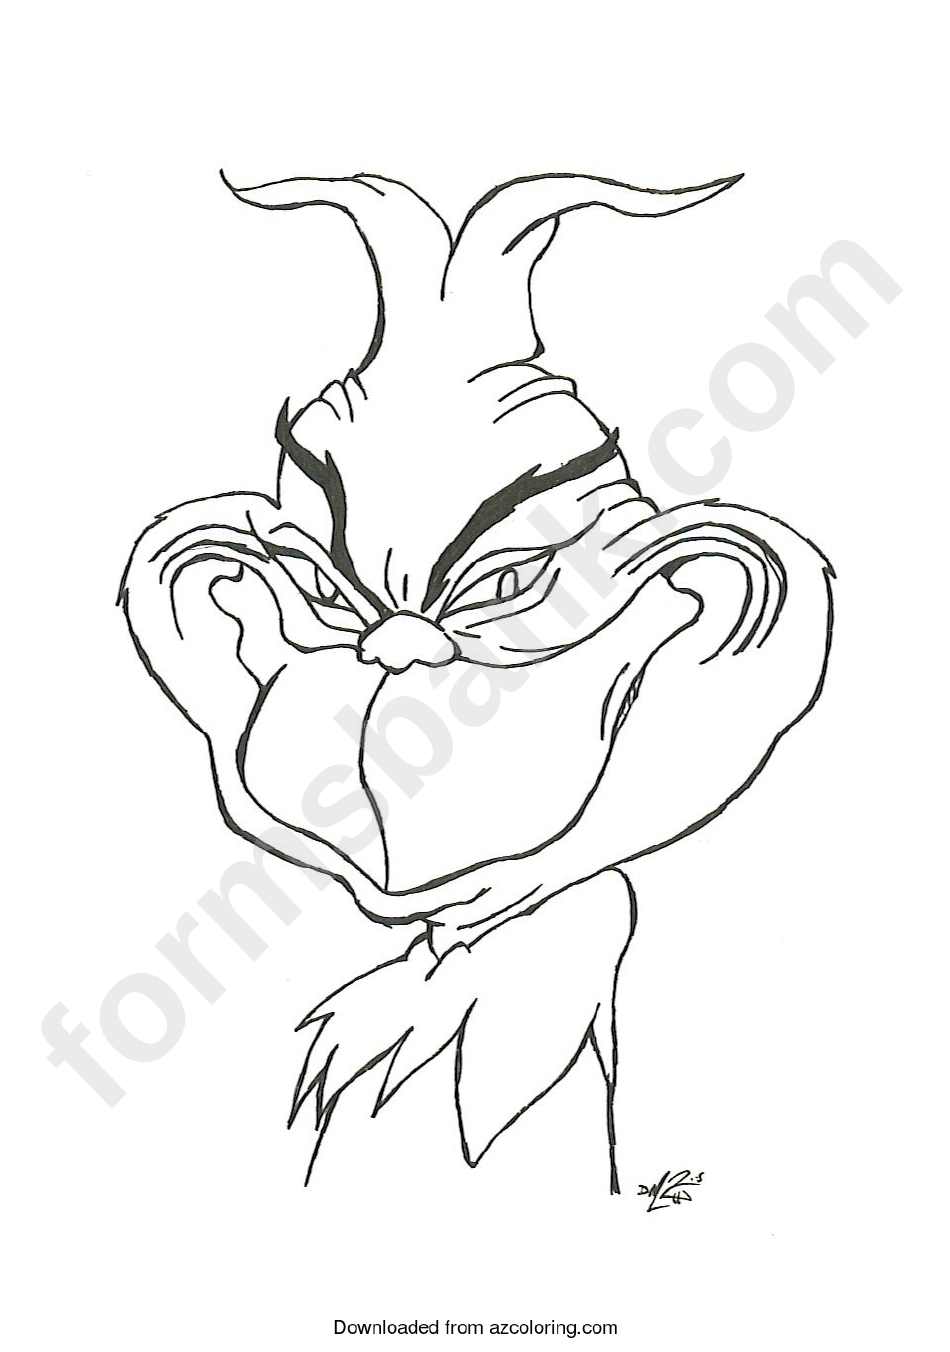 Mr. Grinch Coloring Sheet